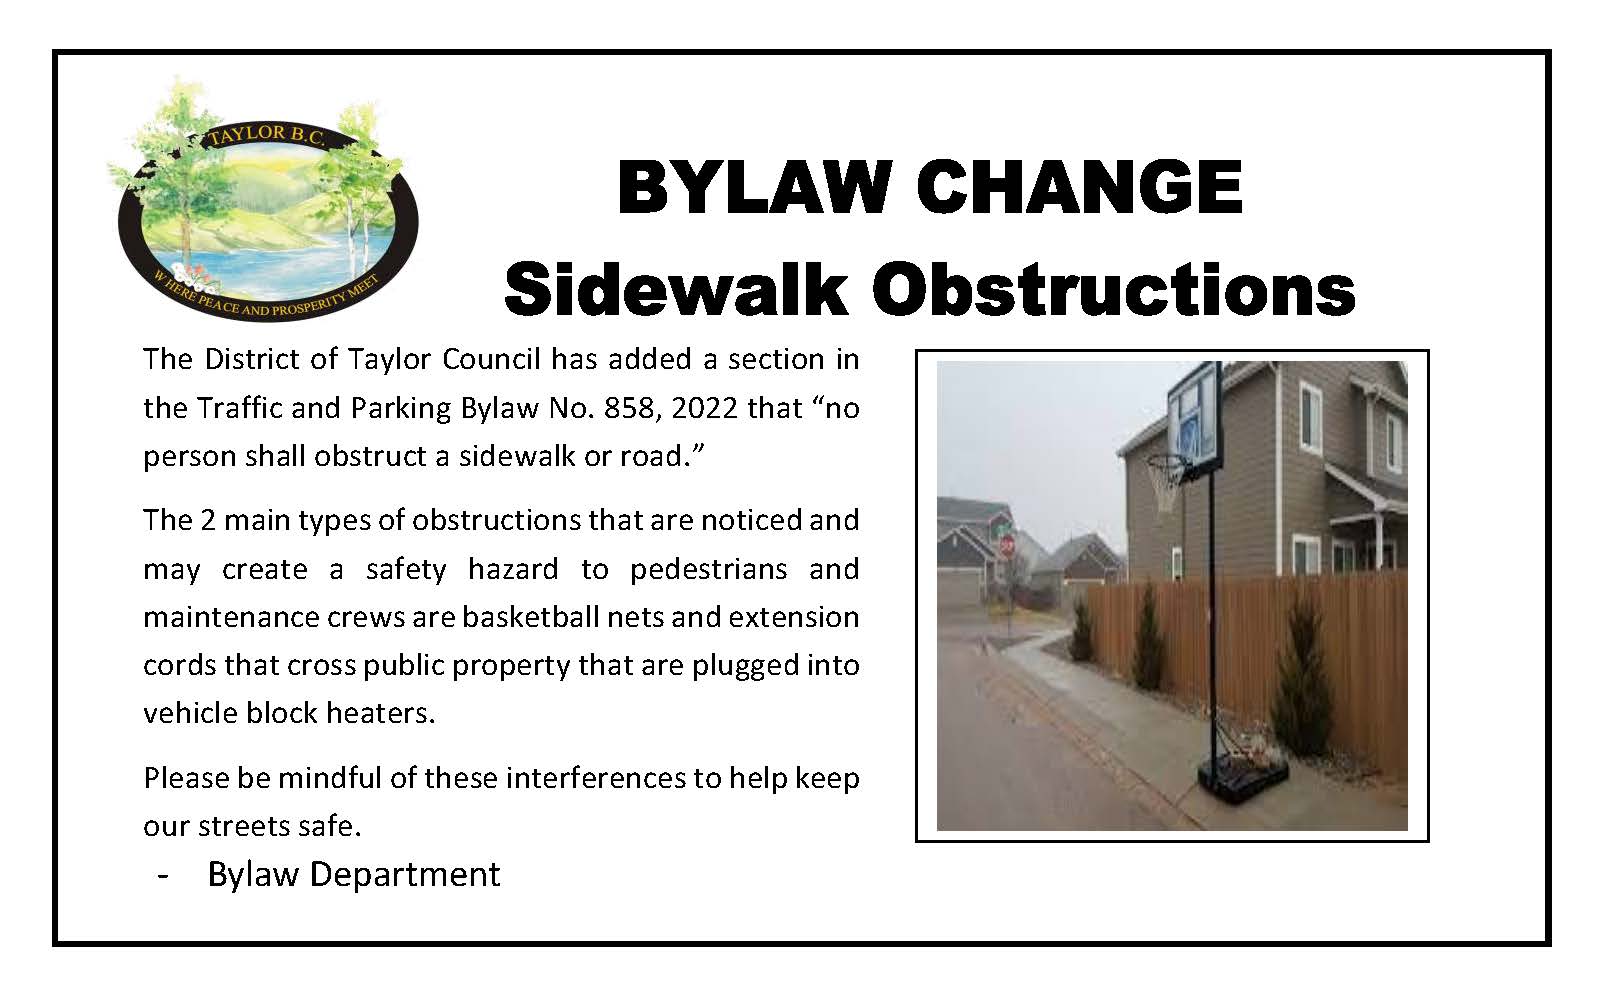 Please be advised of the following Sidewalk Obstruction Bylaw change